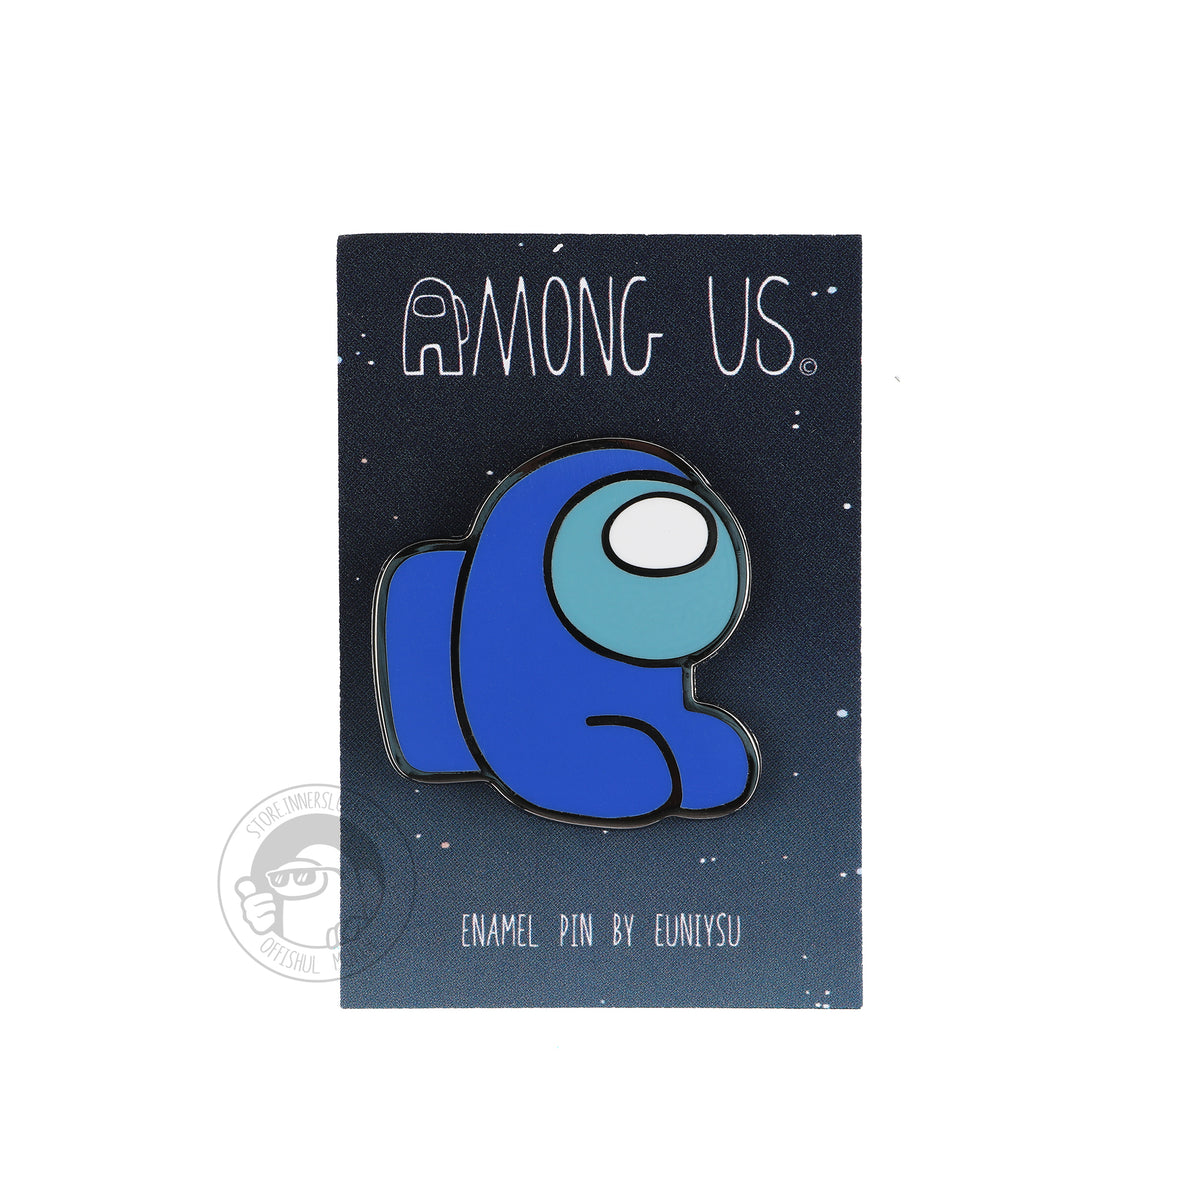 A product photo of the blue Among Us: Mini Crewmate Enamel Pin on its pin card. The backing card is a starry night sky with the Among Us logo and credits the Enamel Pin by Euniysu.